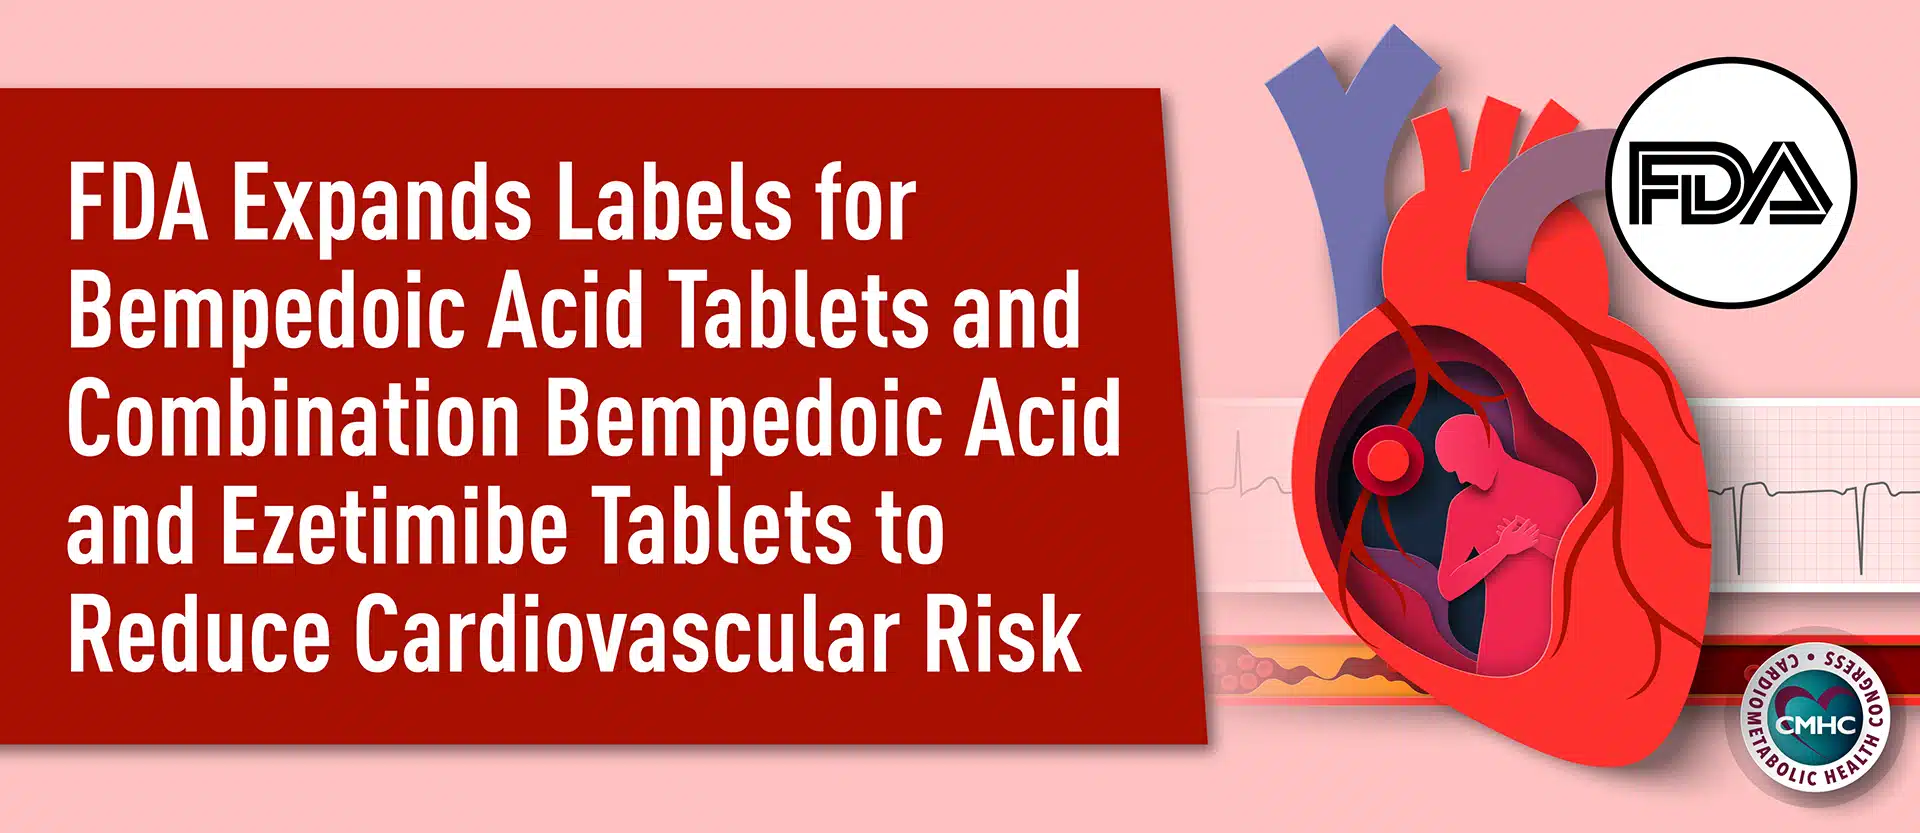 FDA Expands Labels for Bempedoic Acid Tablets and Combination Bempedoic Acid and Ezetimibe Tablets to Reduce Cardiovascular Risk 